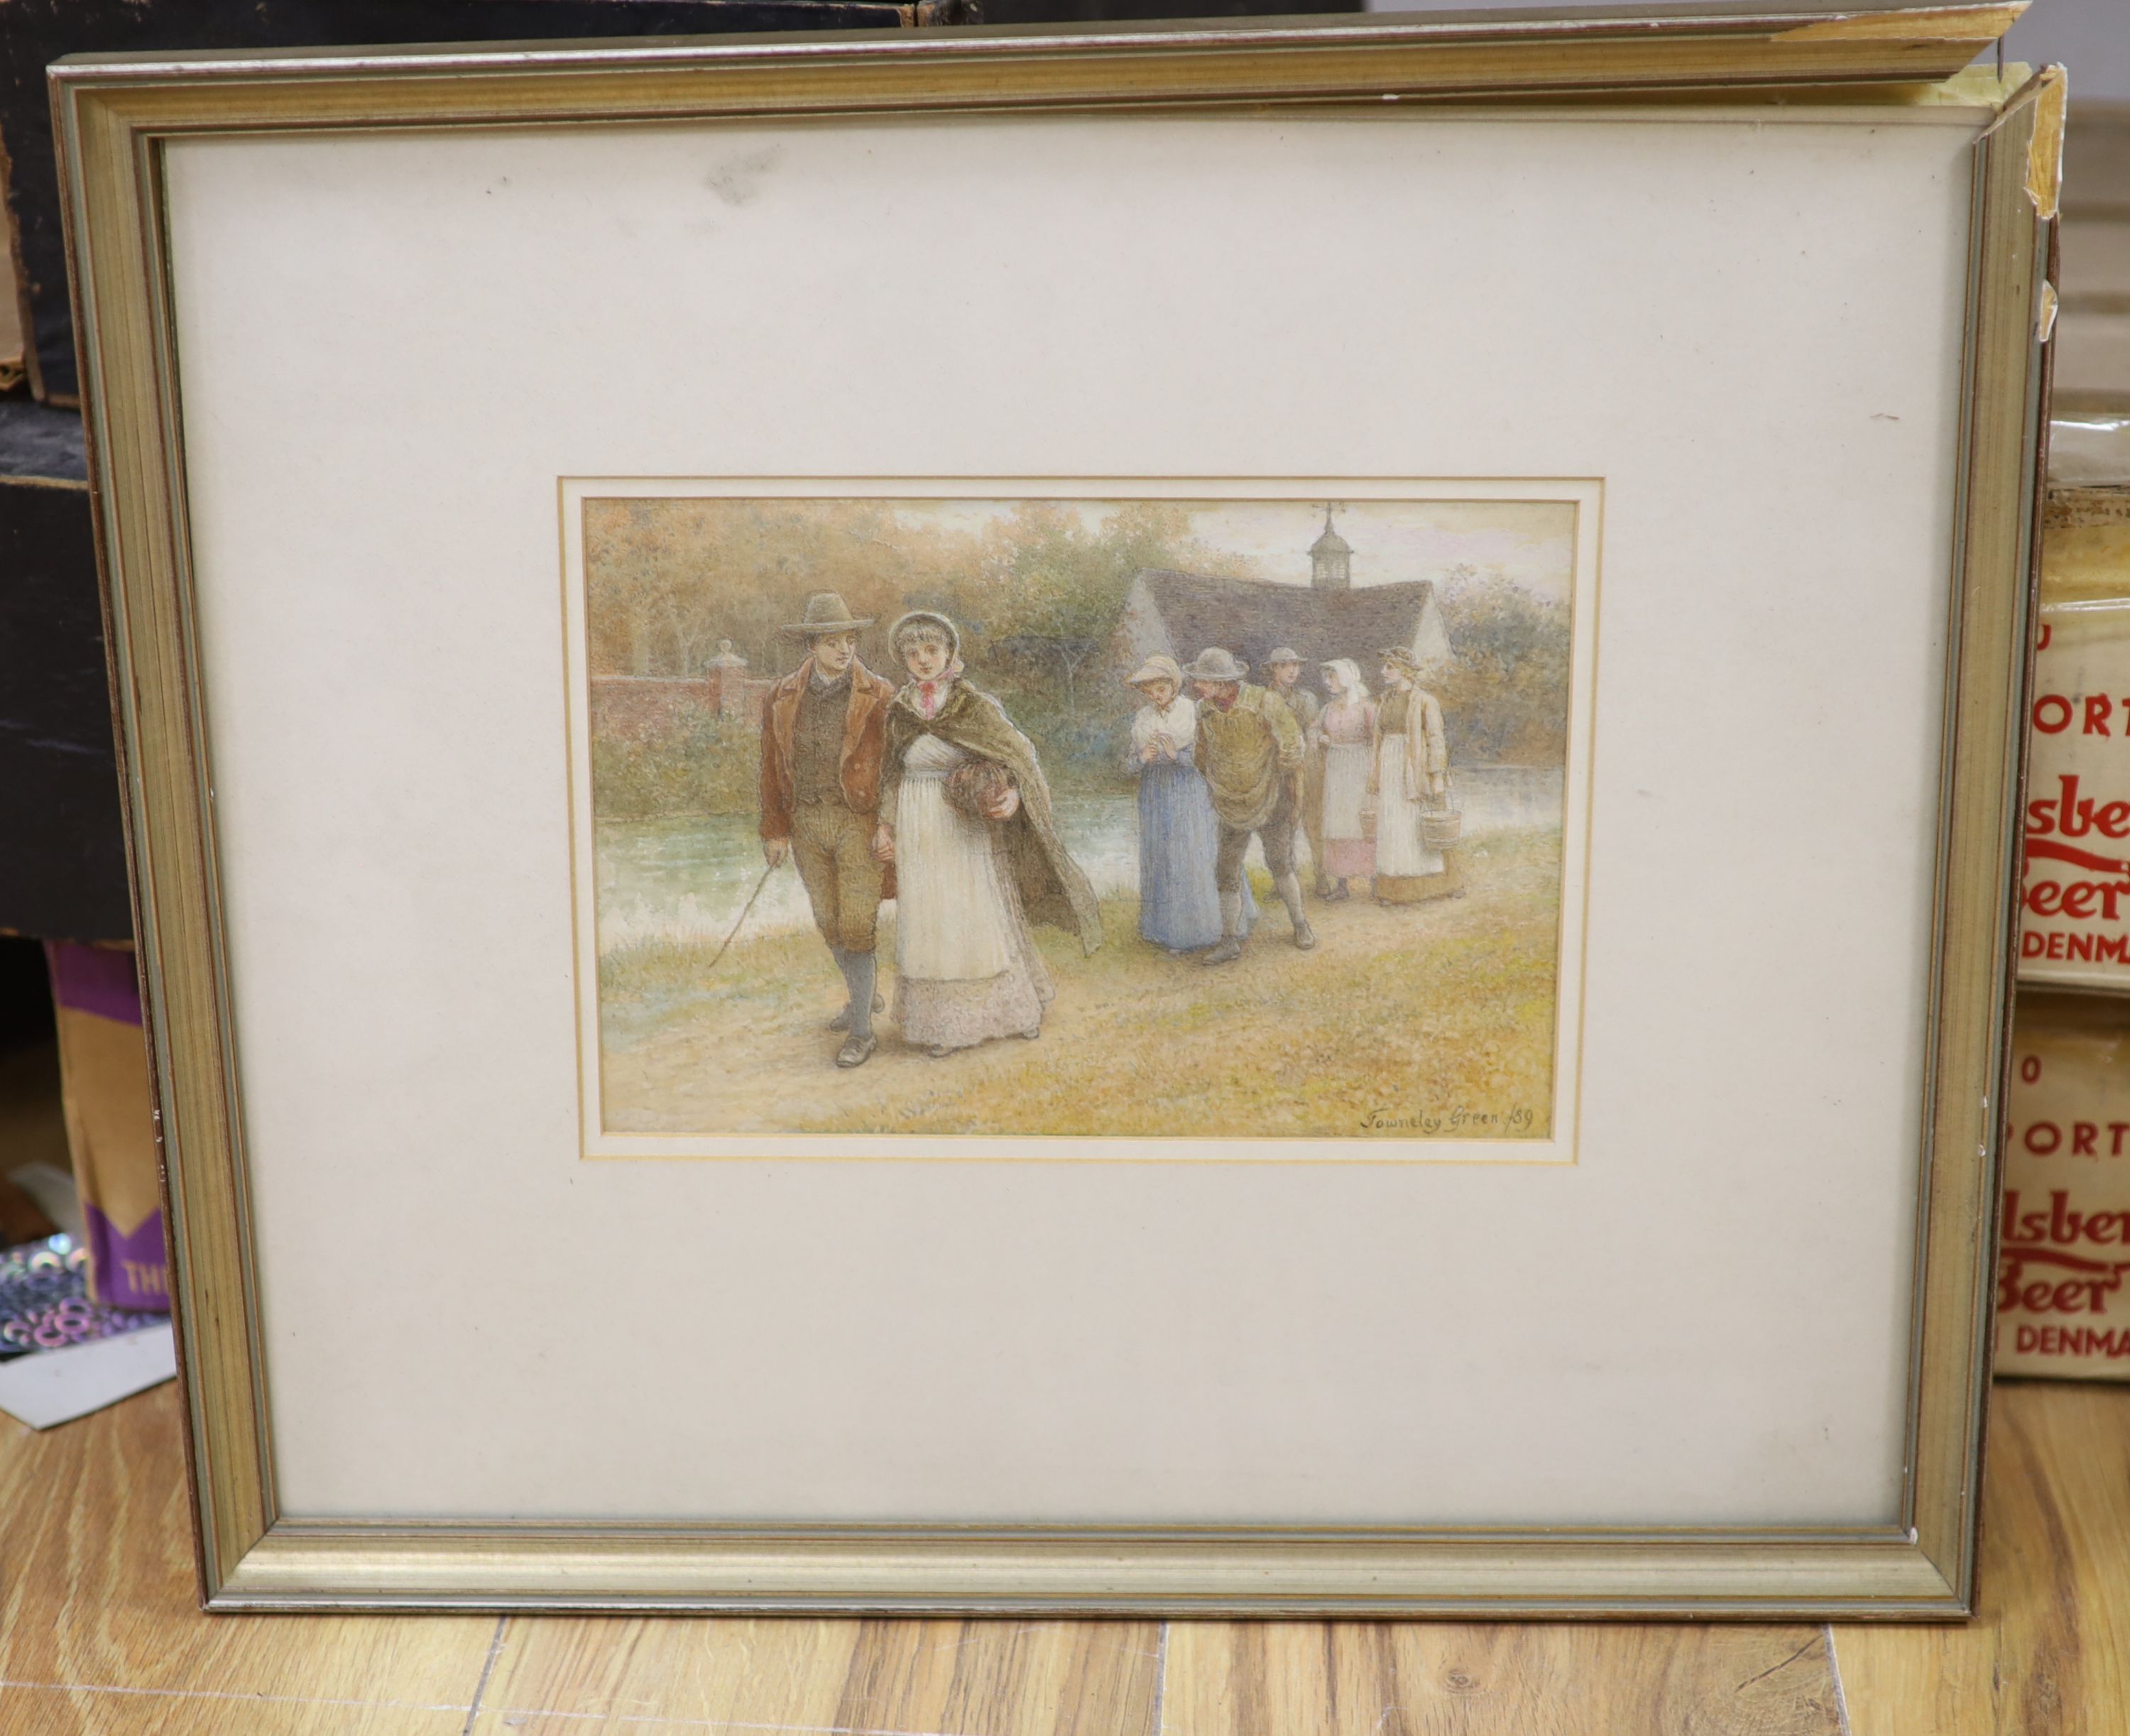 Henry Townley Green (1836-1899), watercolour, 'Return from church', signed and dated '89, 15 x 22cm